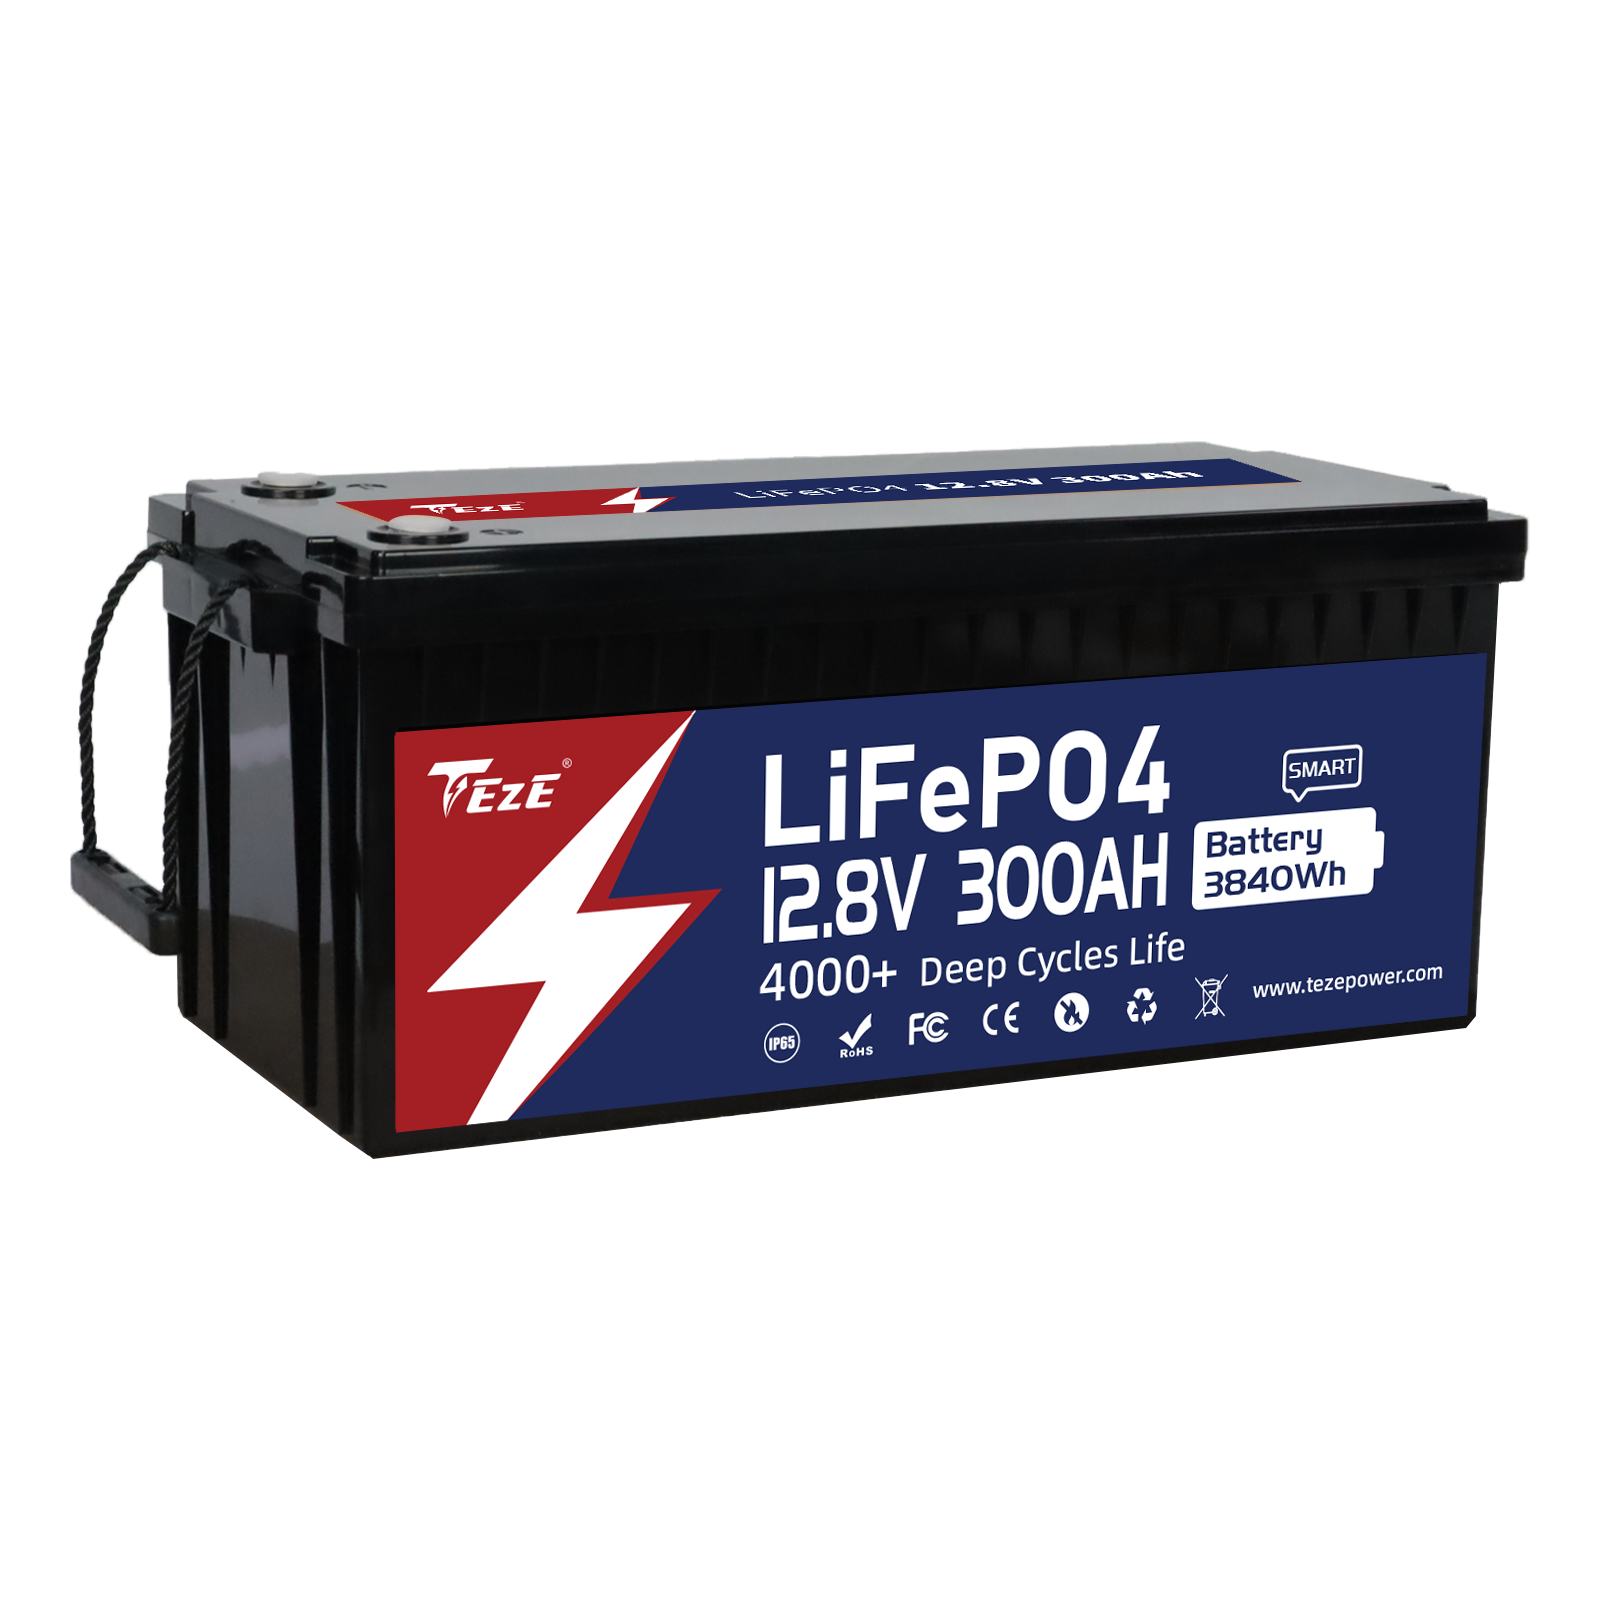 12V Bluetooth LiFePO4 Deep Cycle Lithium Battery, Built-in Daly BMS